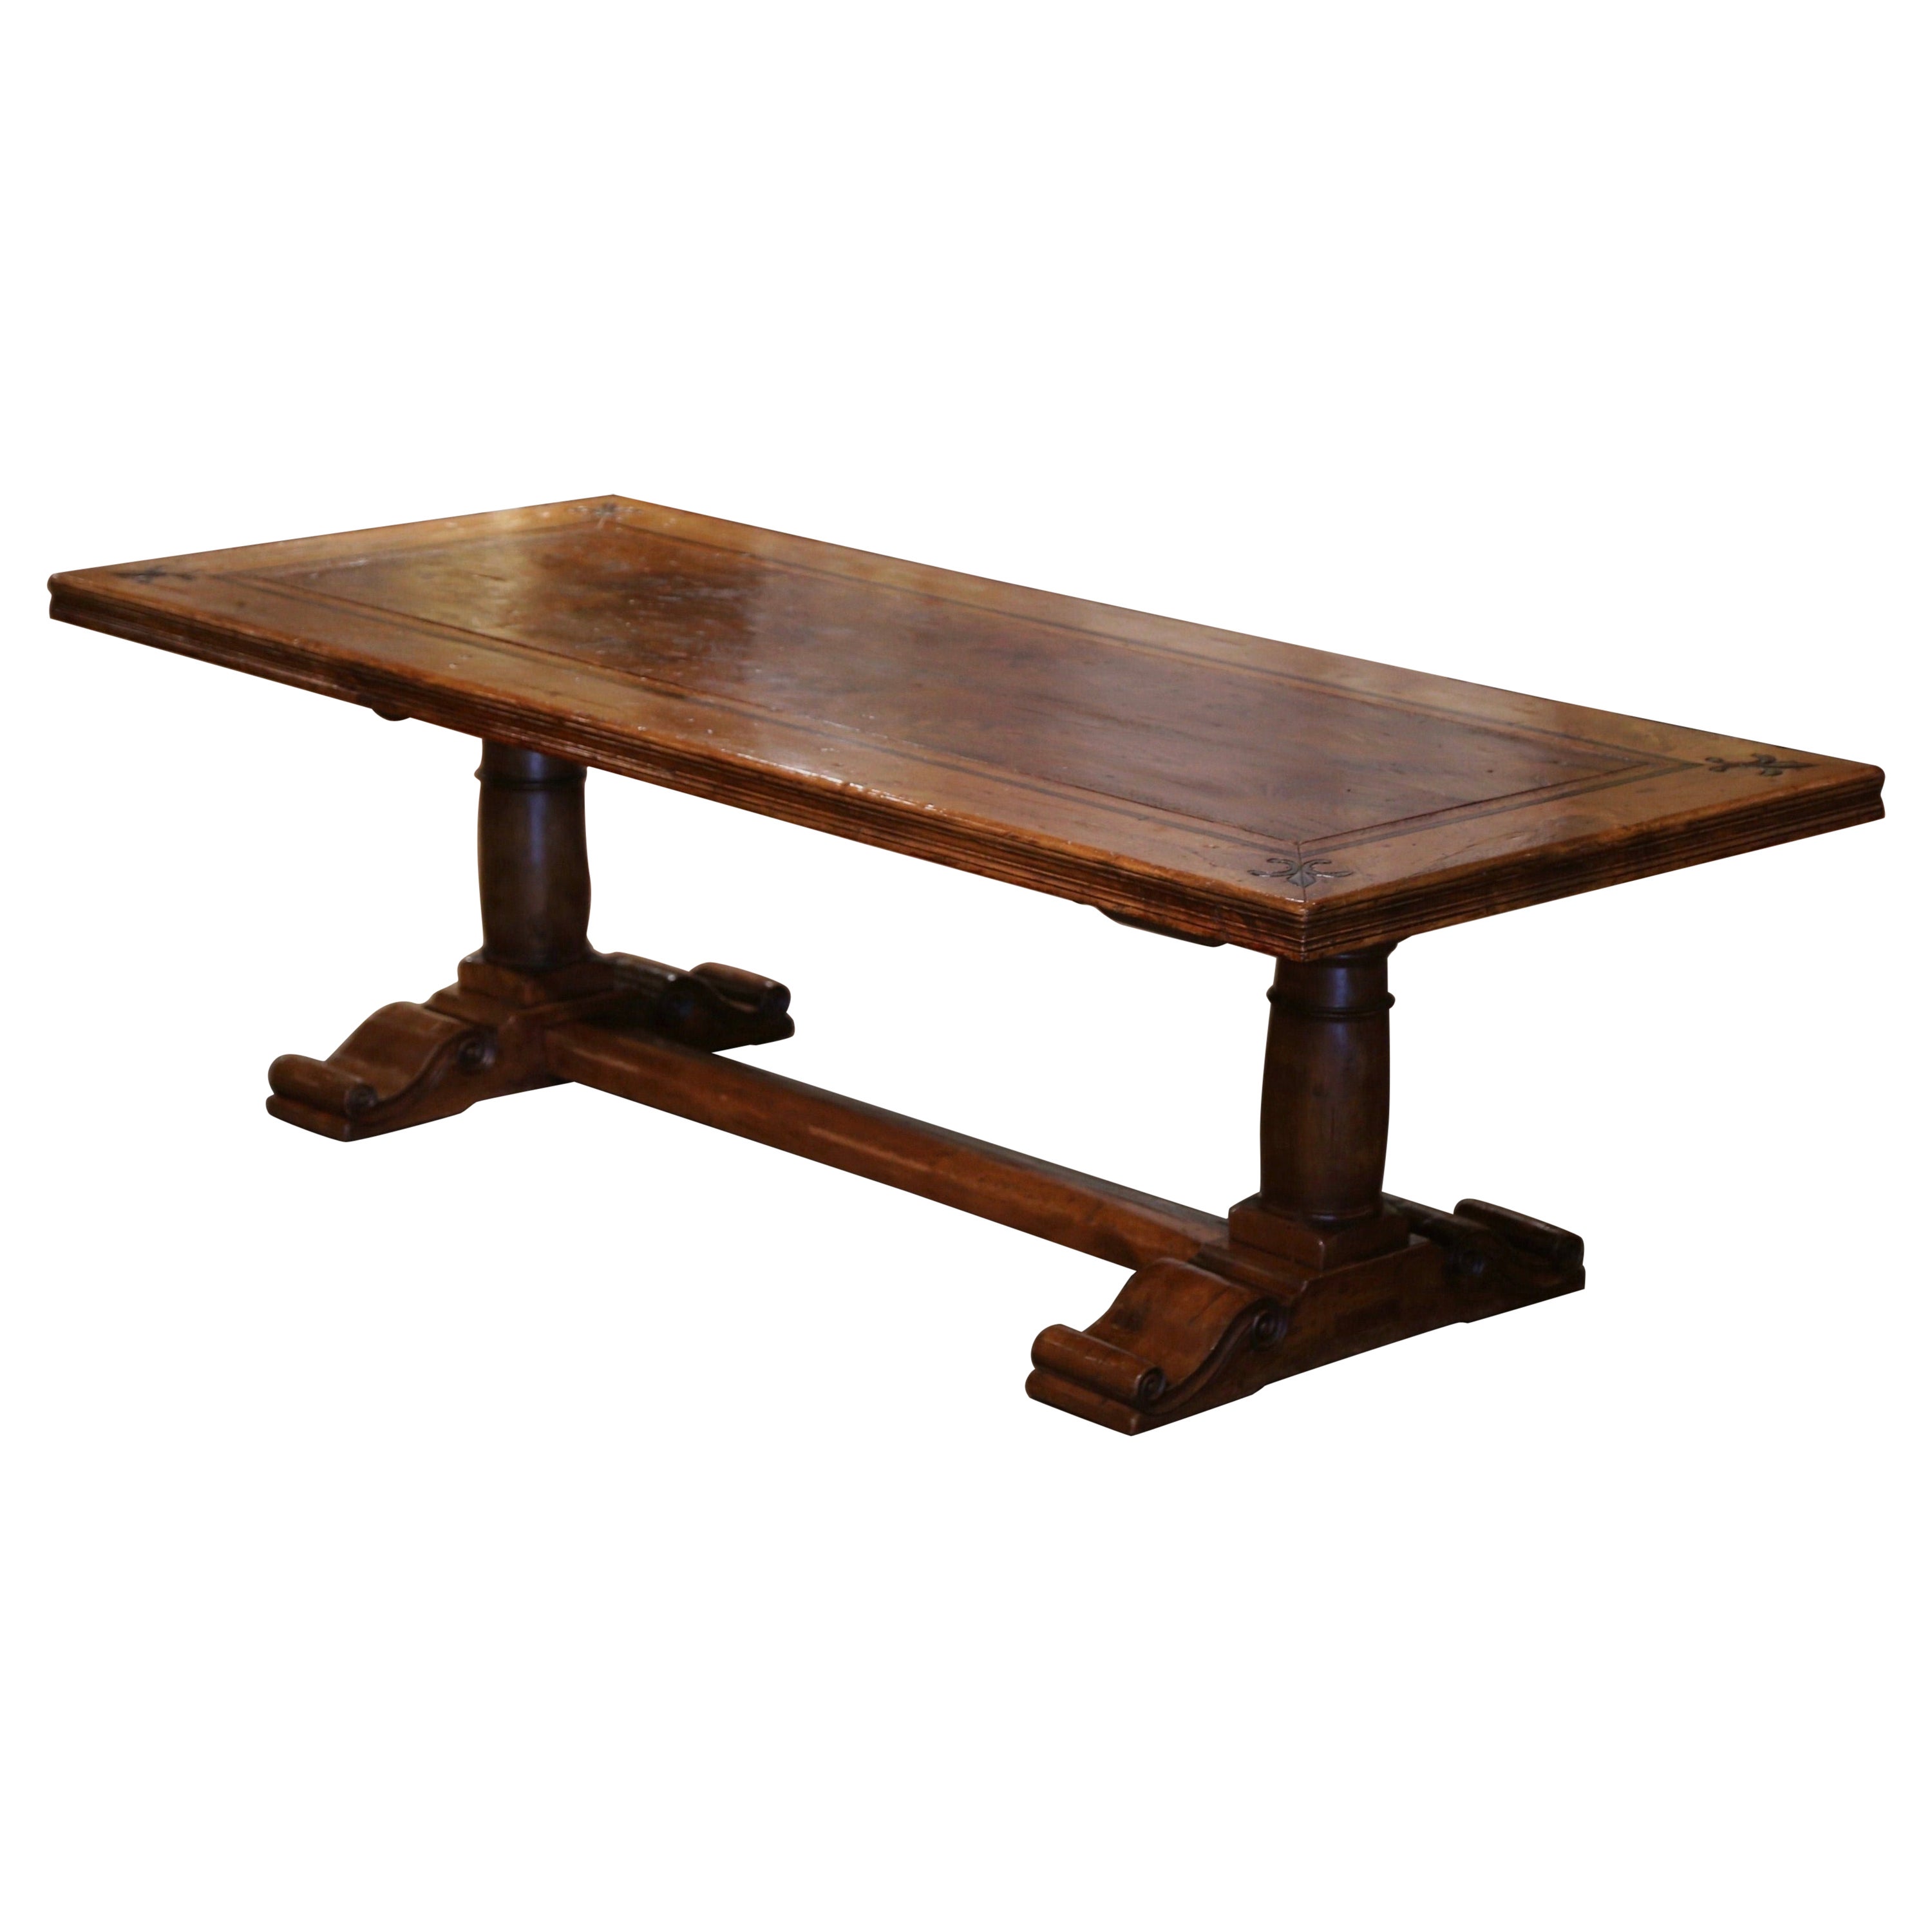  French Carved Antique Walnut & Elm Trestle Dining Table with Fleur de Lys Decor For Sale